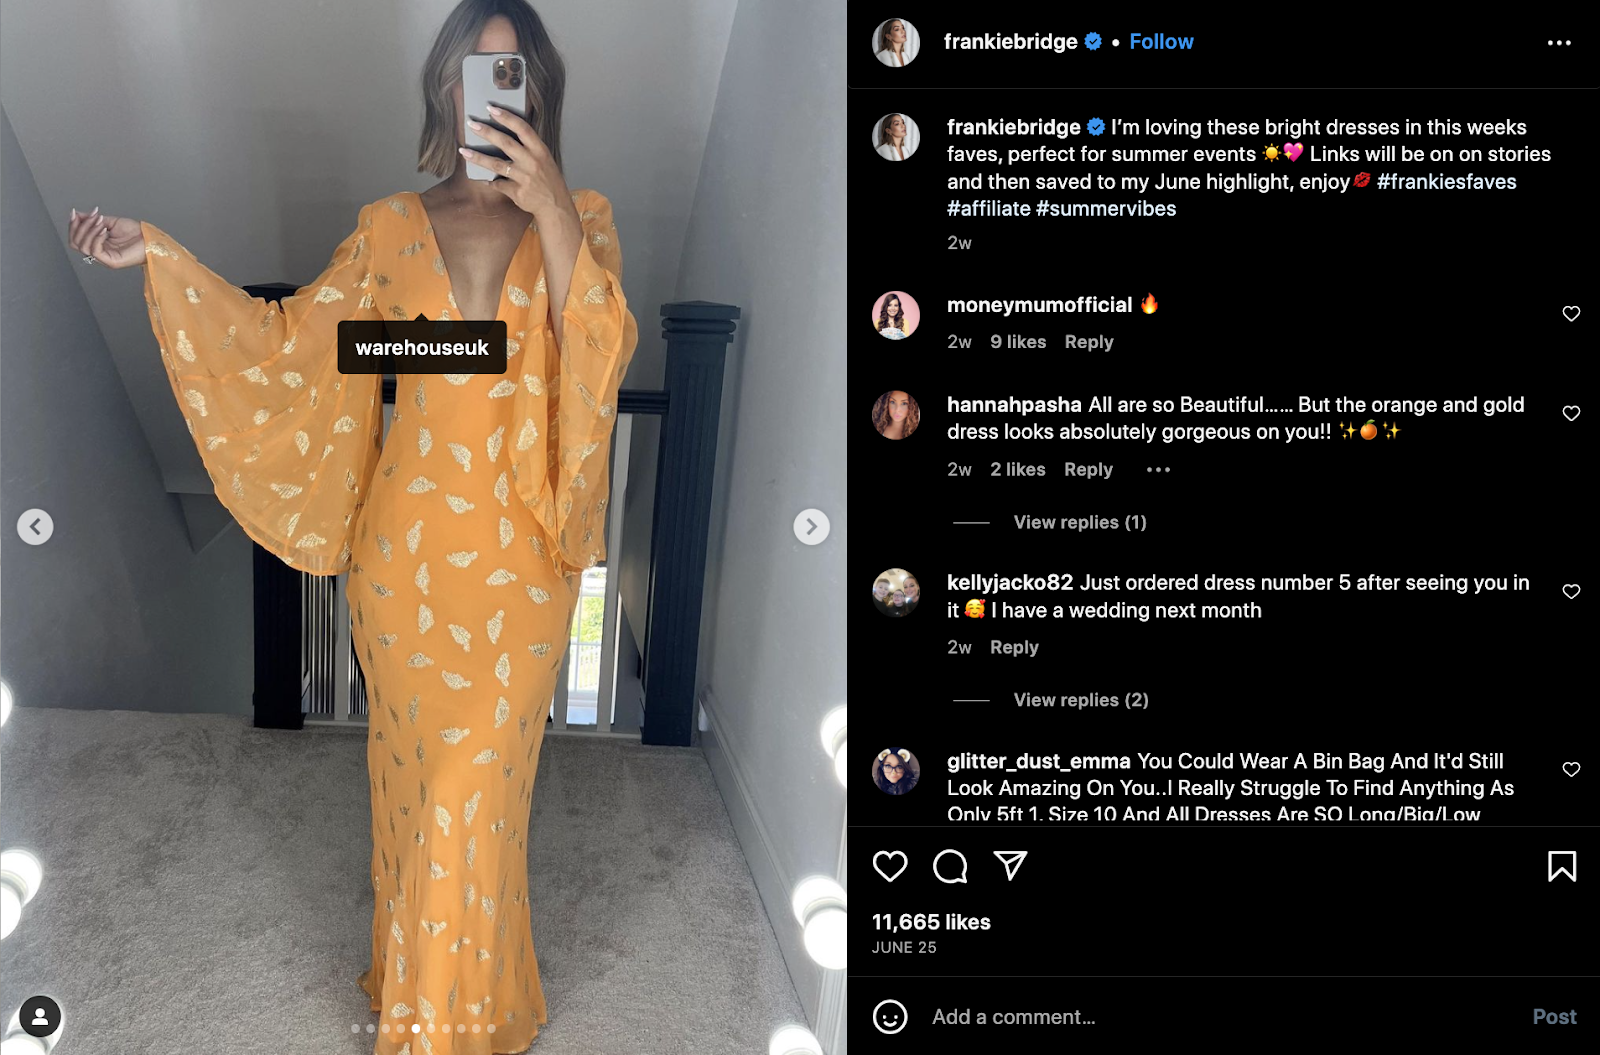 Screenshot of an affiliate marketing Instagram post in which woman poses in orange and gold dress with flared bell sleeves.